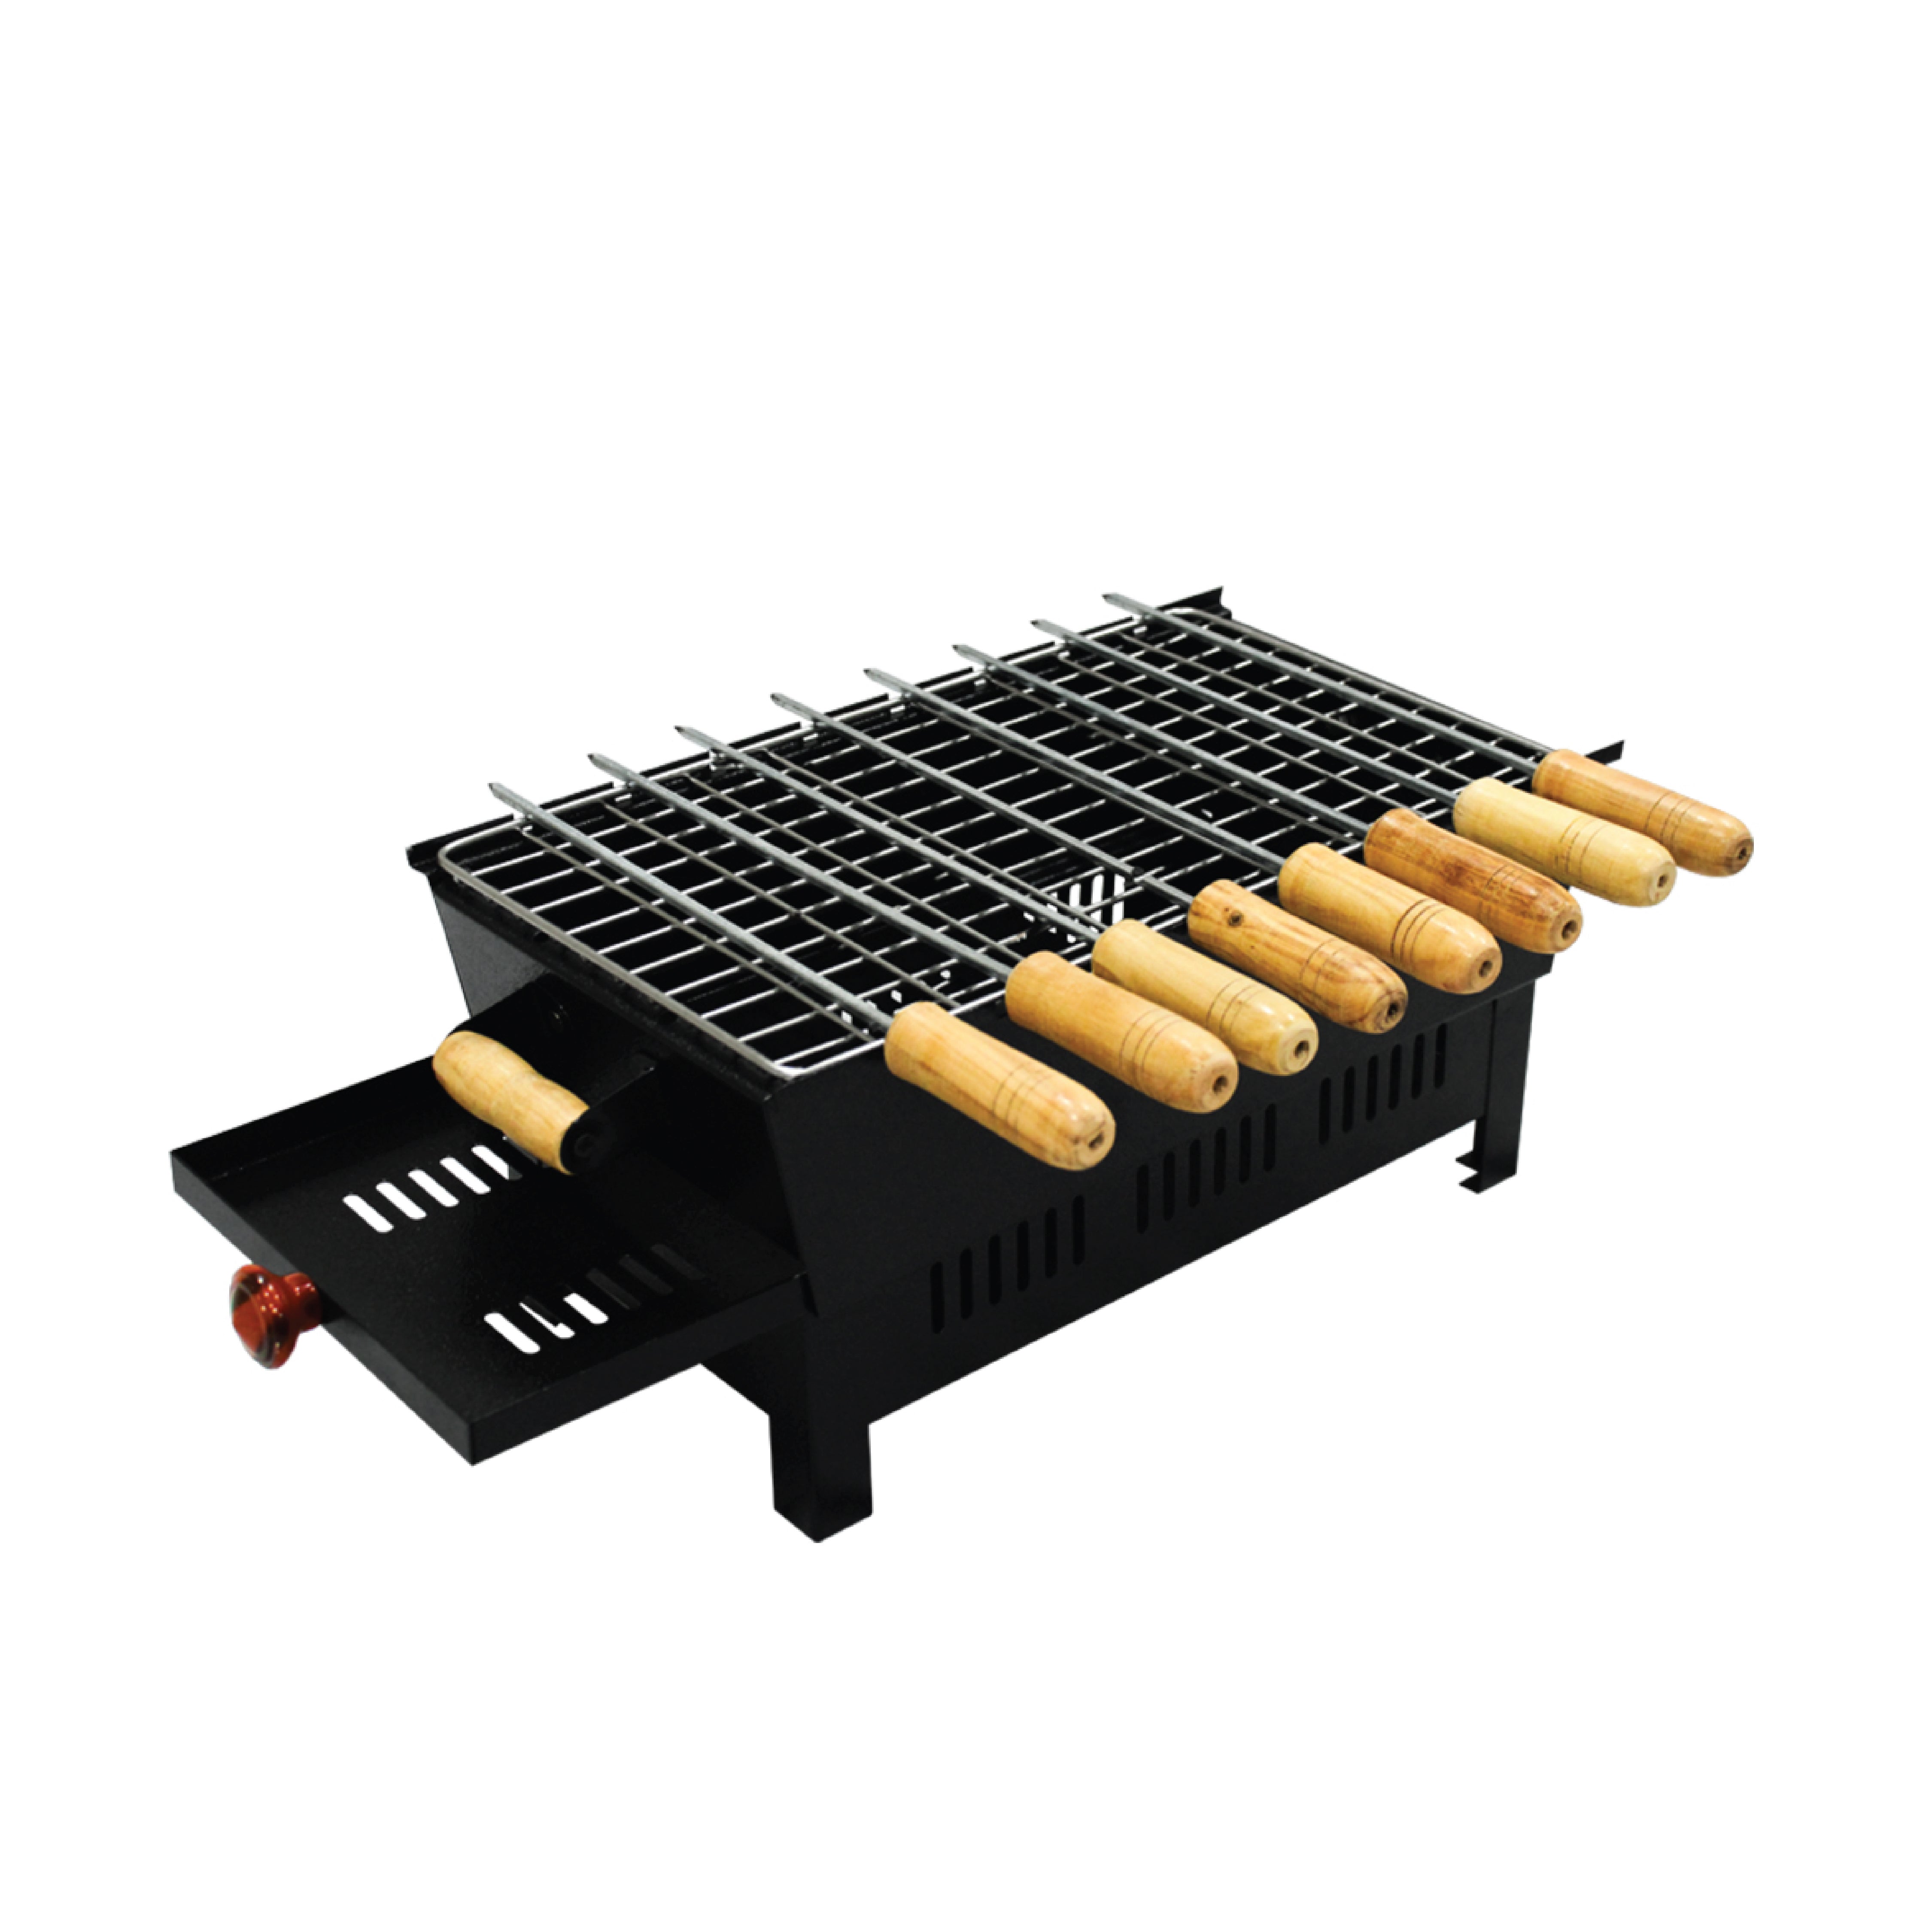 KOWS 8 skewer delux coal barbeque   (BBQ007)